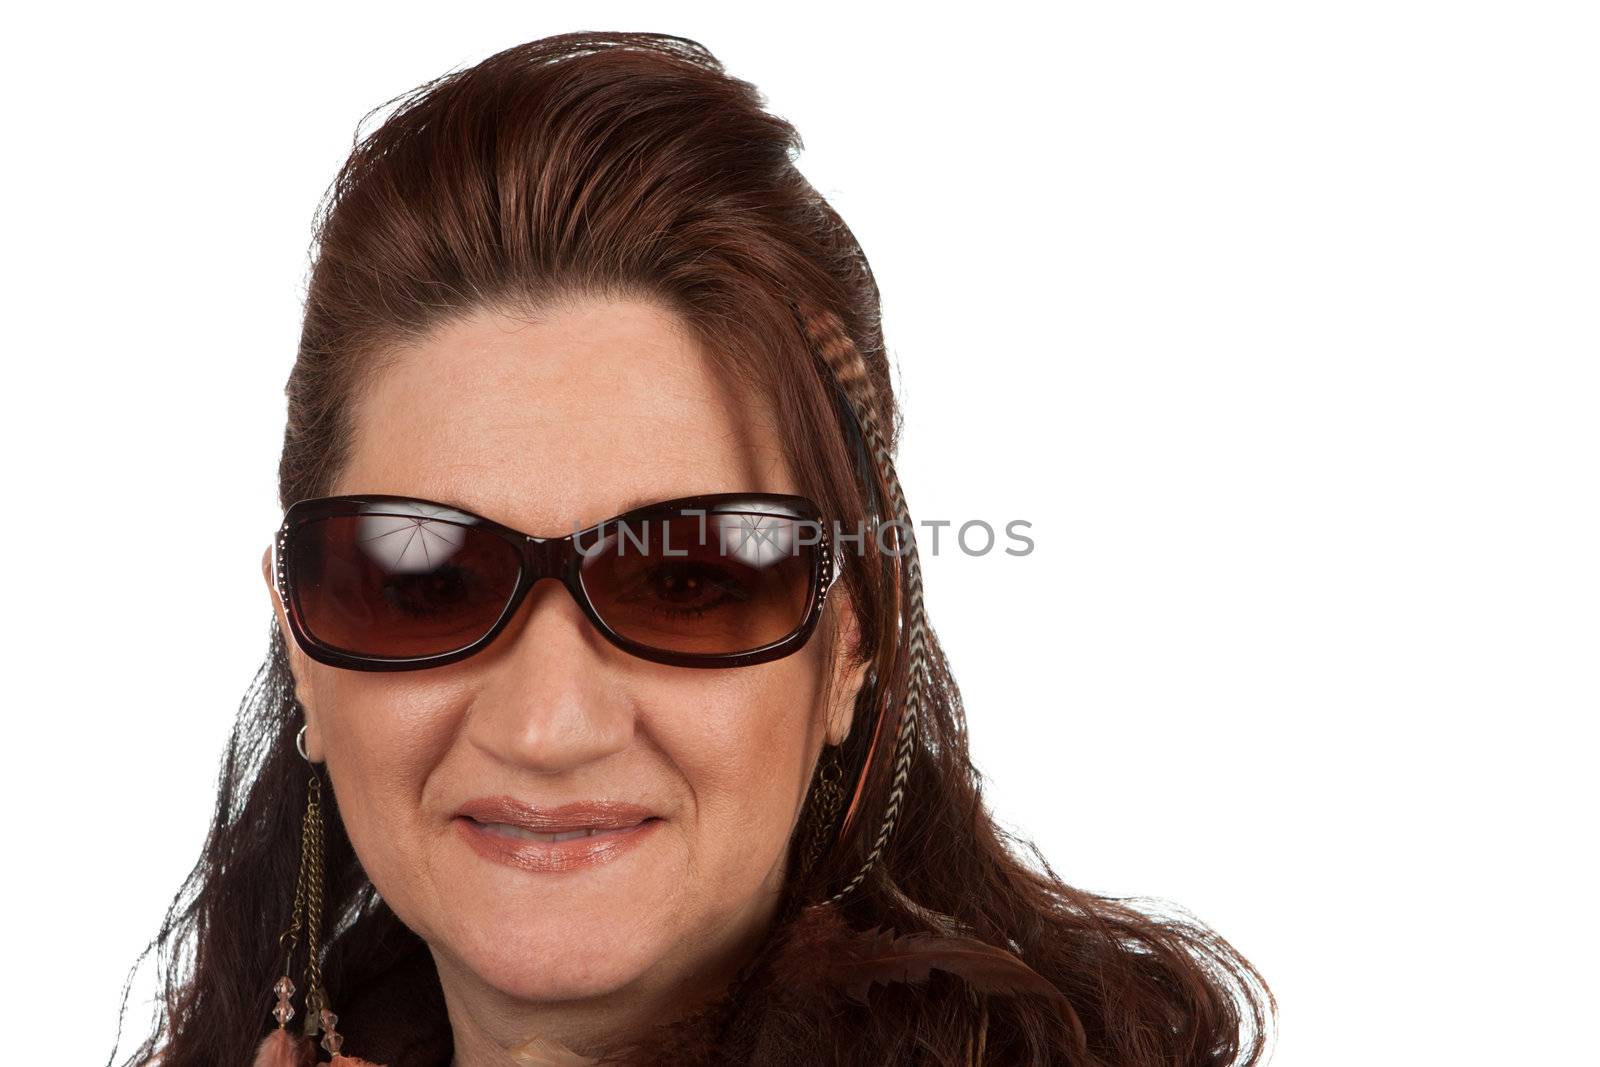 Brunette middle aged woman with feather hair extensions and accessories.